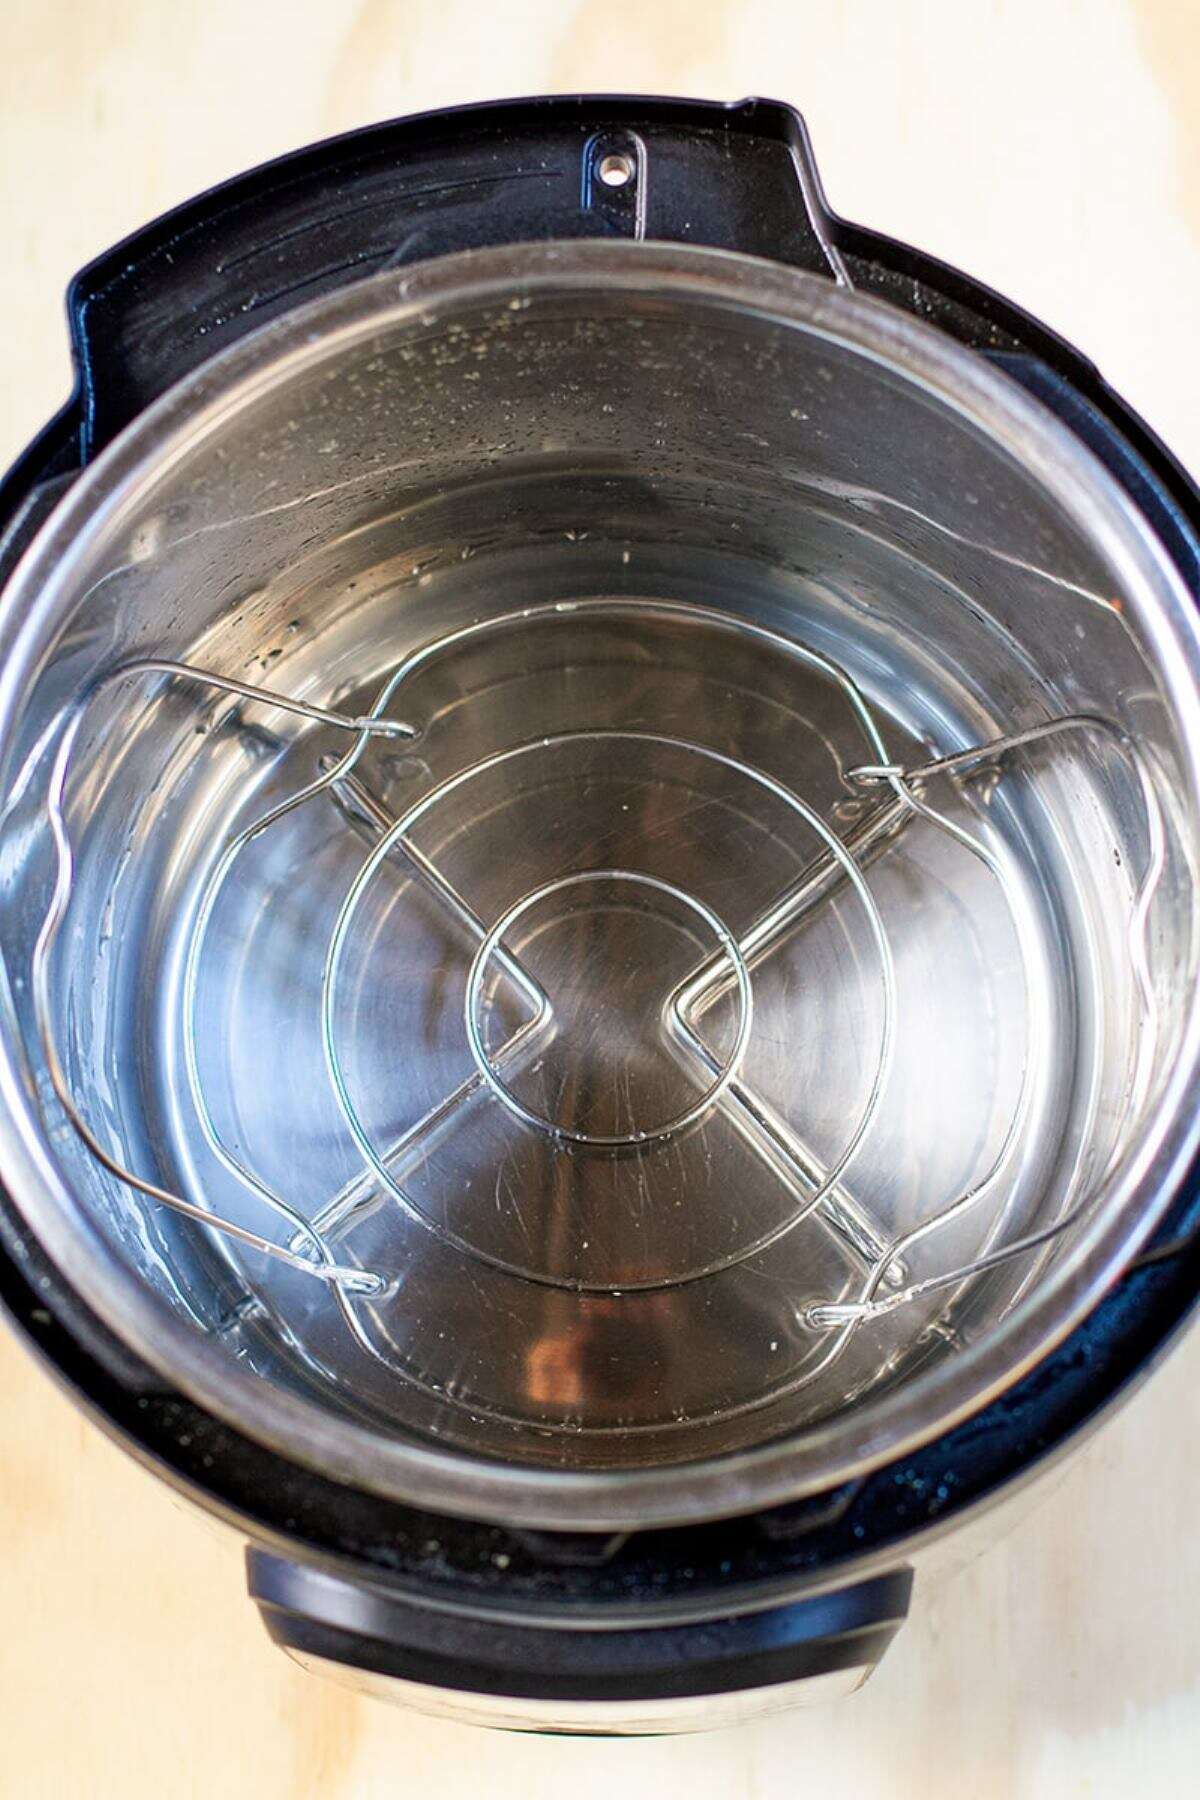 water in the instant pot